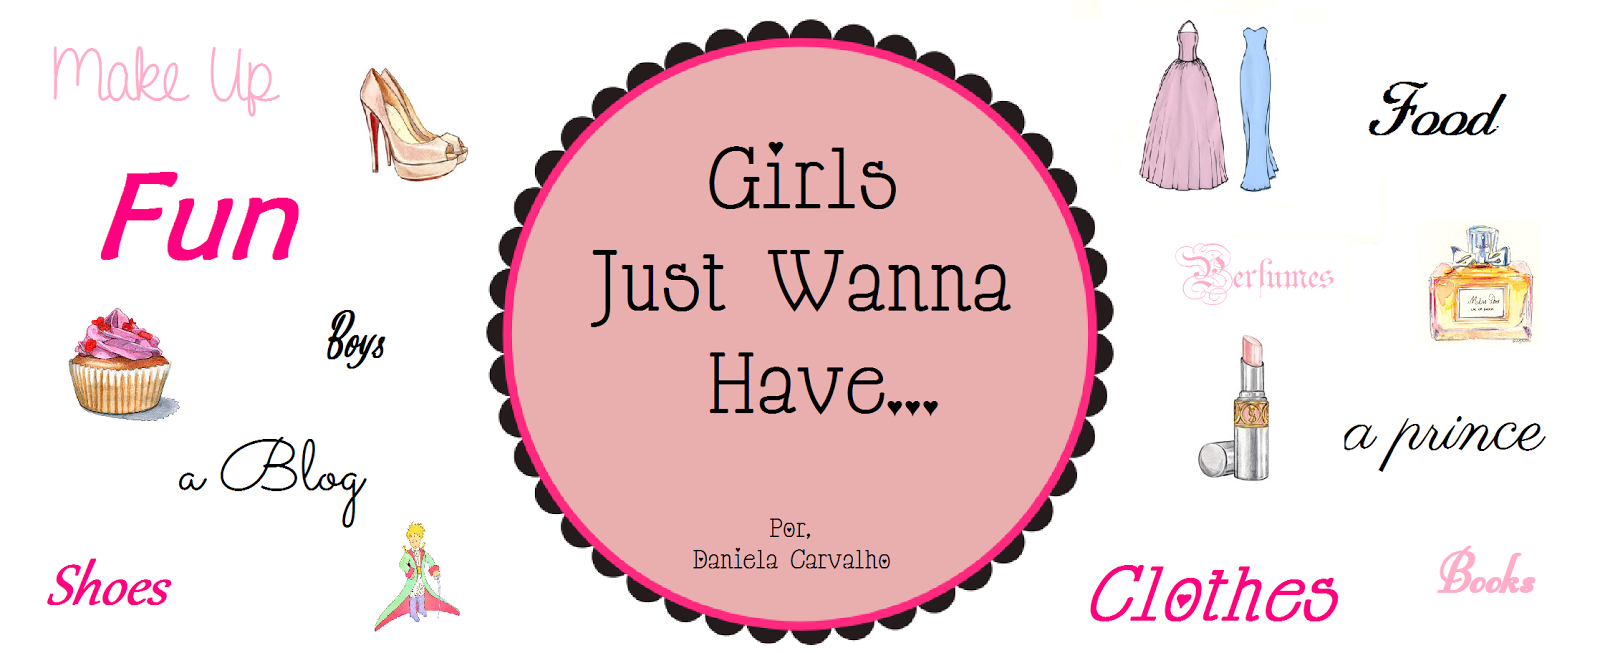 Girls Just Wanna Have...